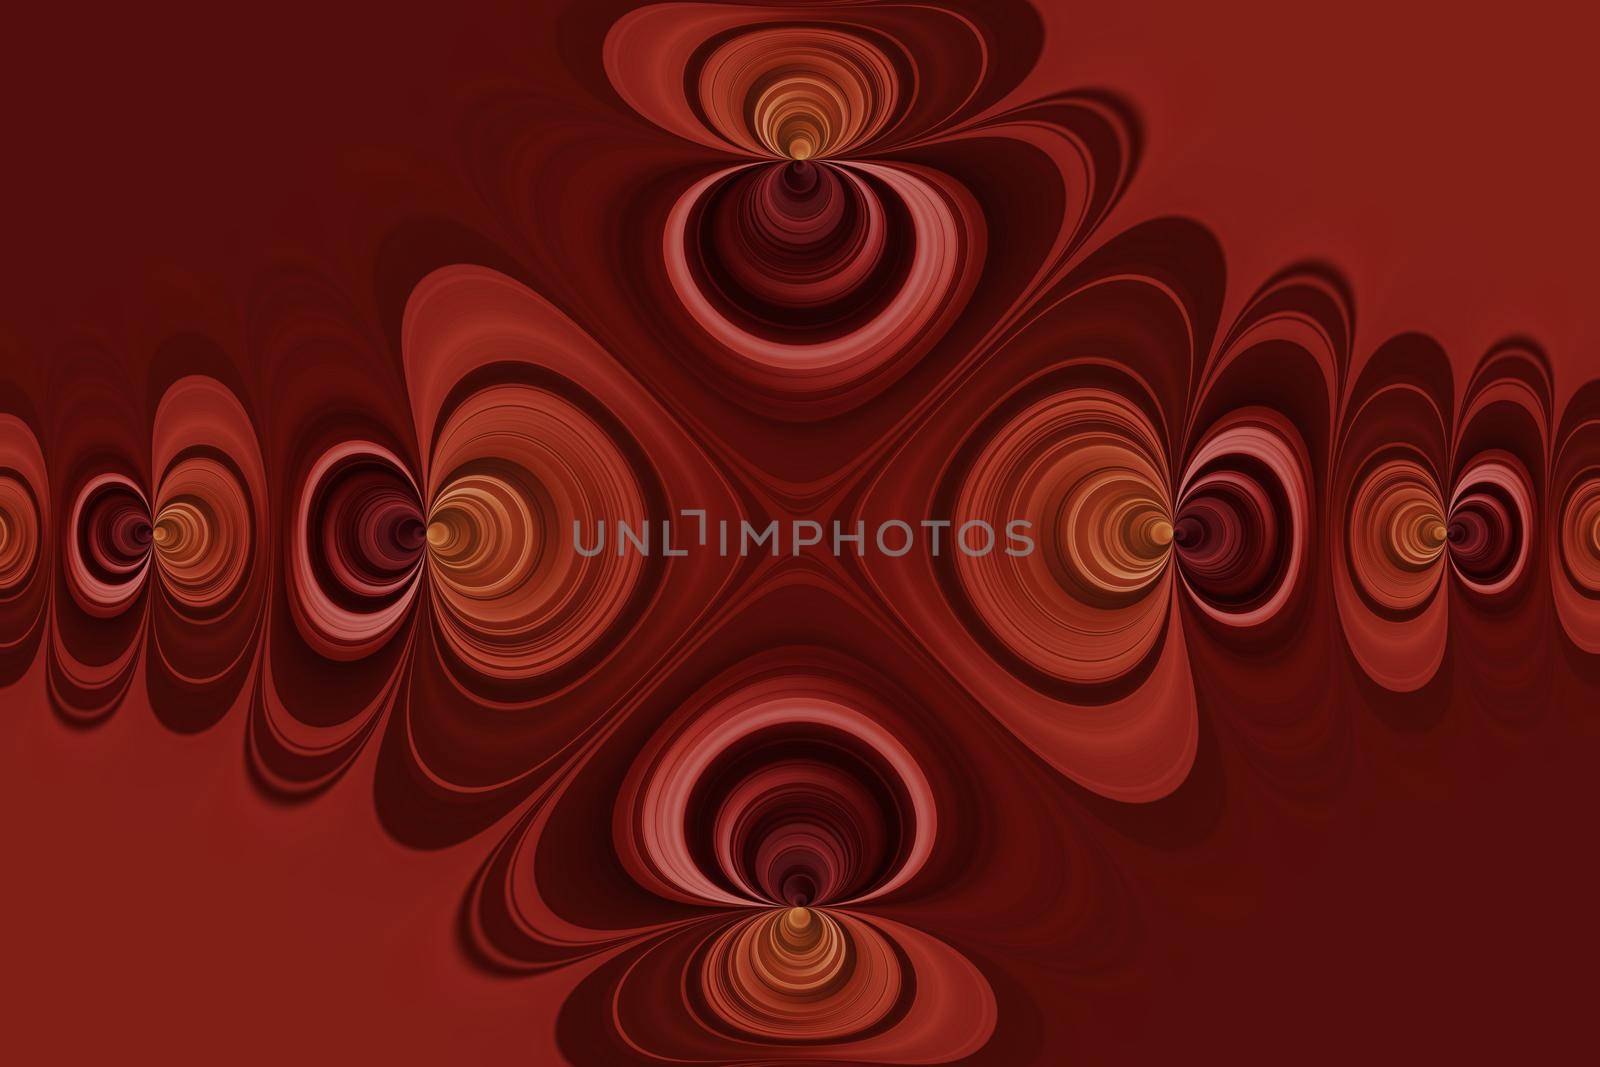 Curved lines in a cross shape, bright abstract background in the red shades, seamless pattern